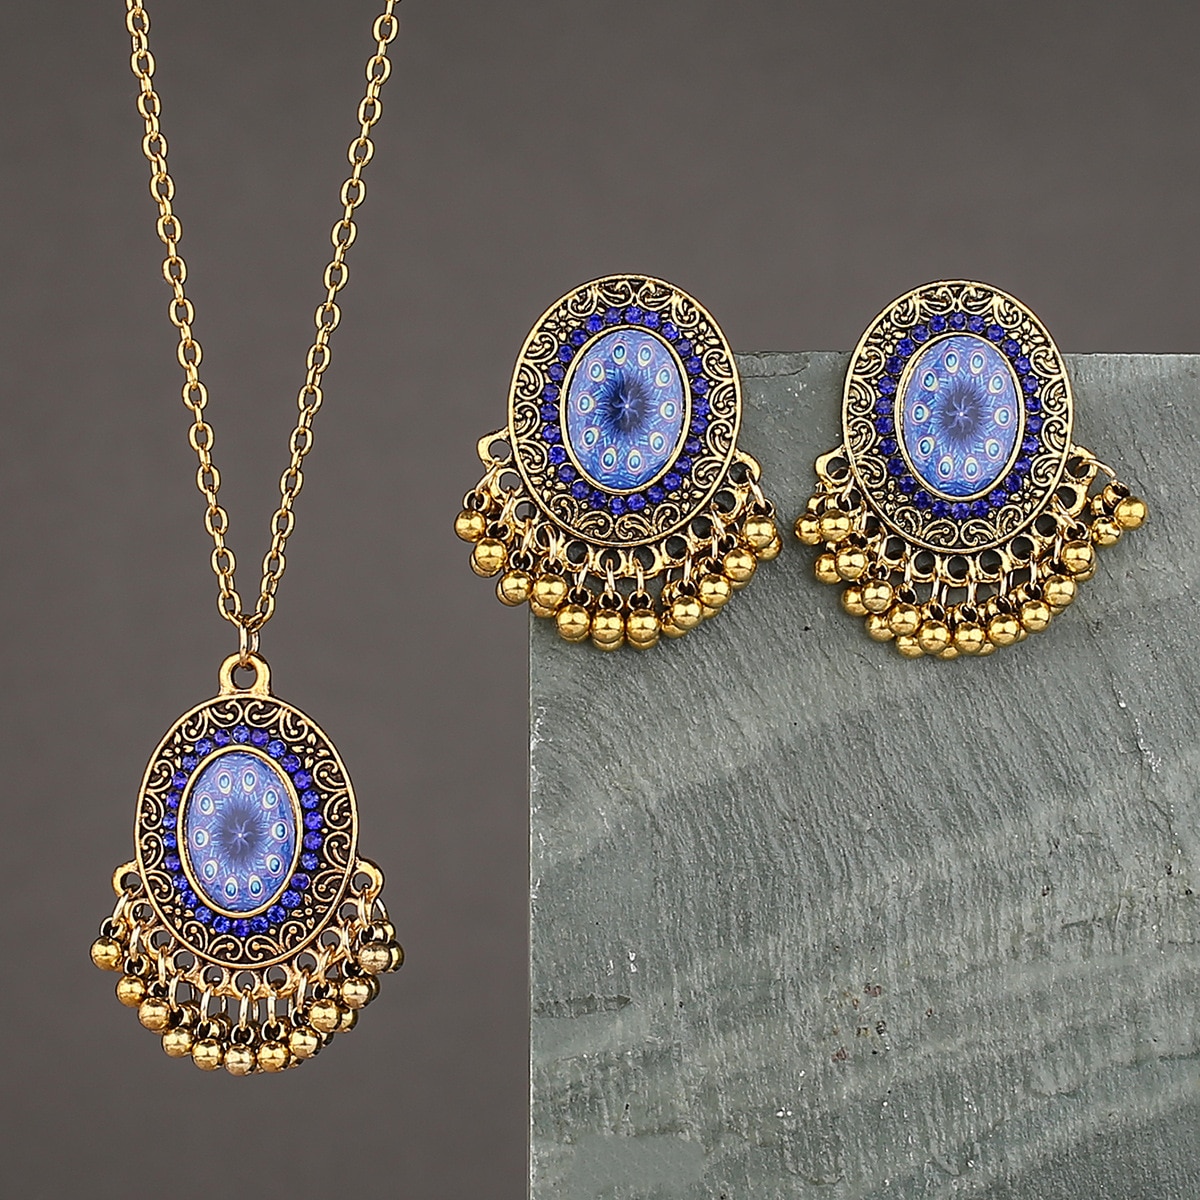 Afghan-Vintage-Tribal-Blue-Flower-Statement-Necklace-Earring-Jewelry-Sets-Gold-Color-Indian-Chain-Ne-1005004536385713-2